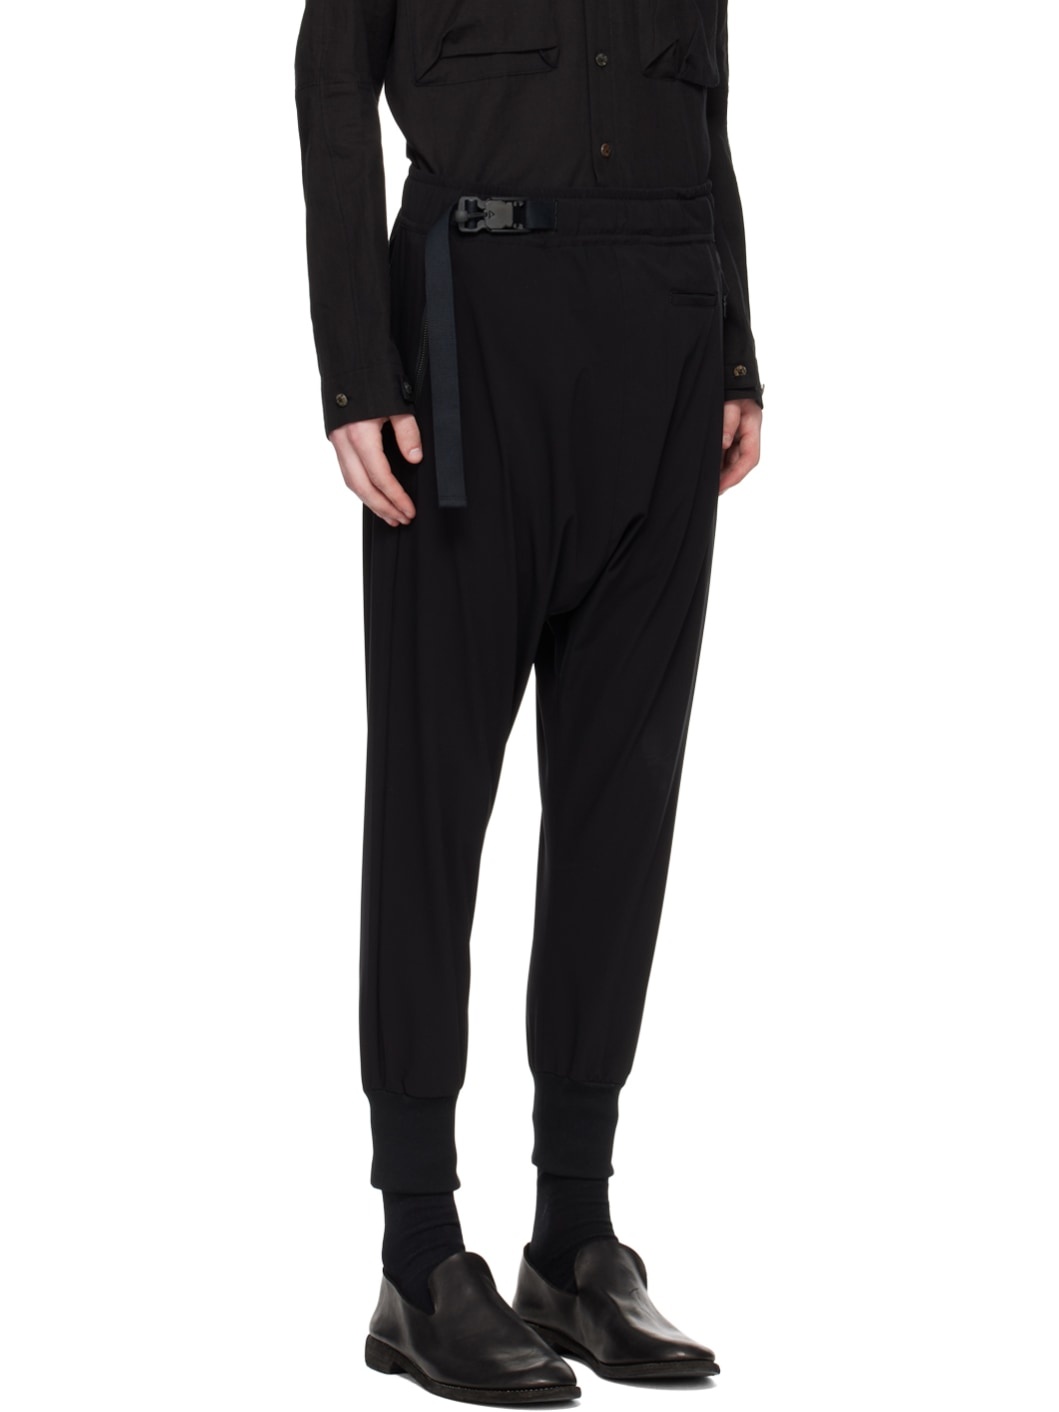 Black Water-Repellent Trousers - 2